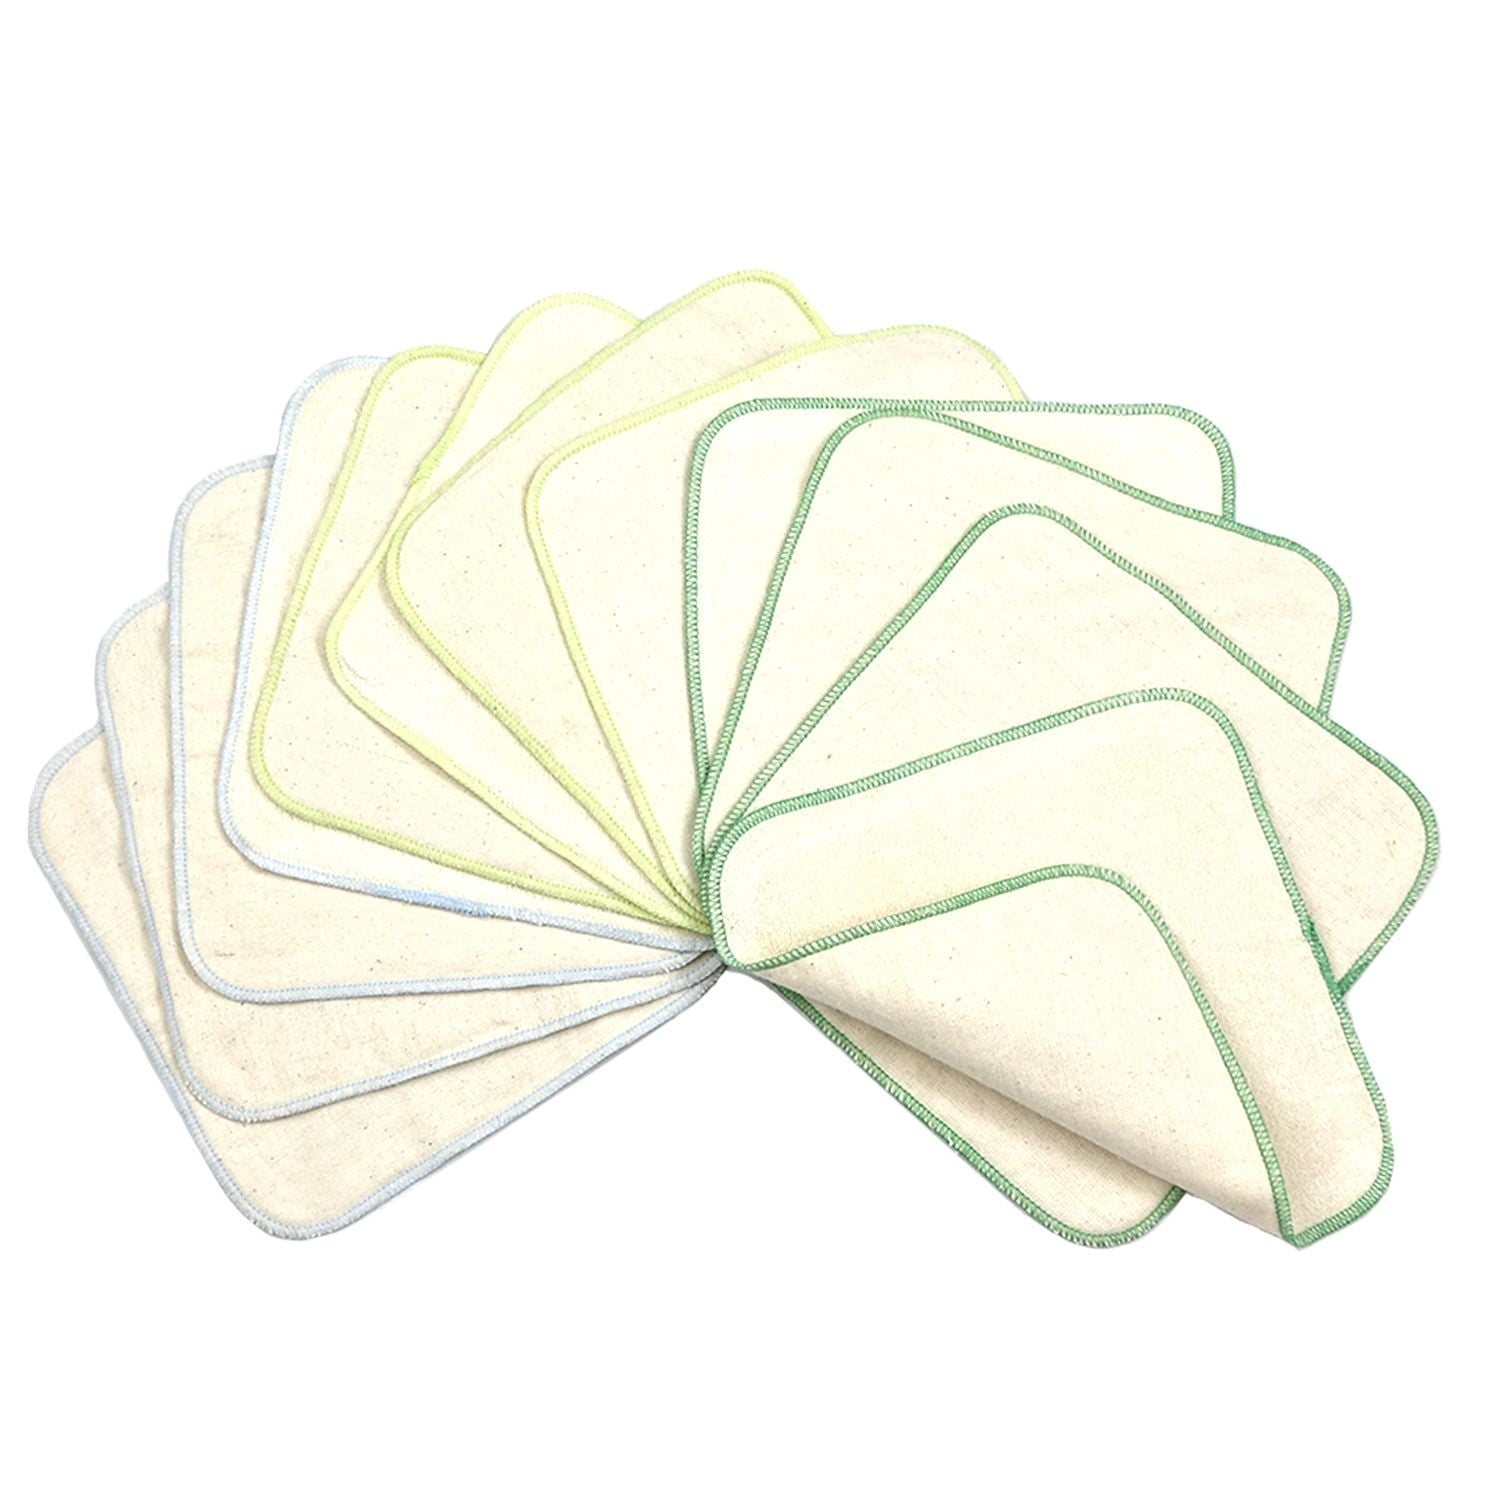 Avo & Cado Flannel Cotton Reusable Wipes - 12 Pack-Accessories-Avo & Cado-Green Edging-The Nappy Market